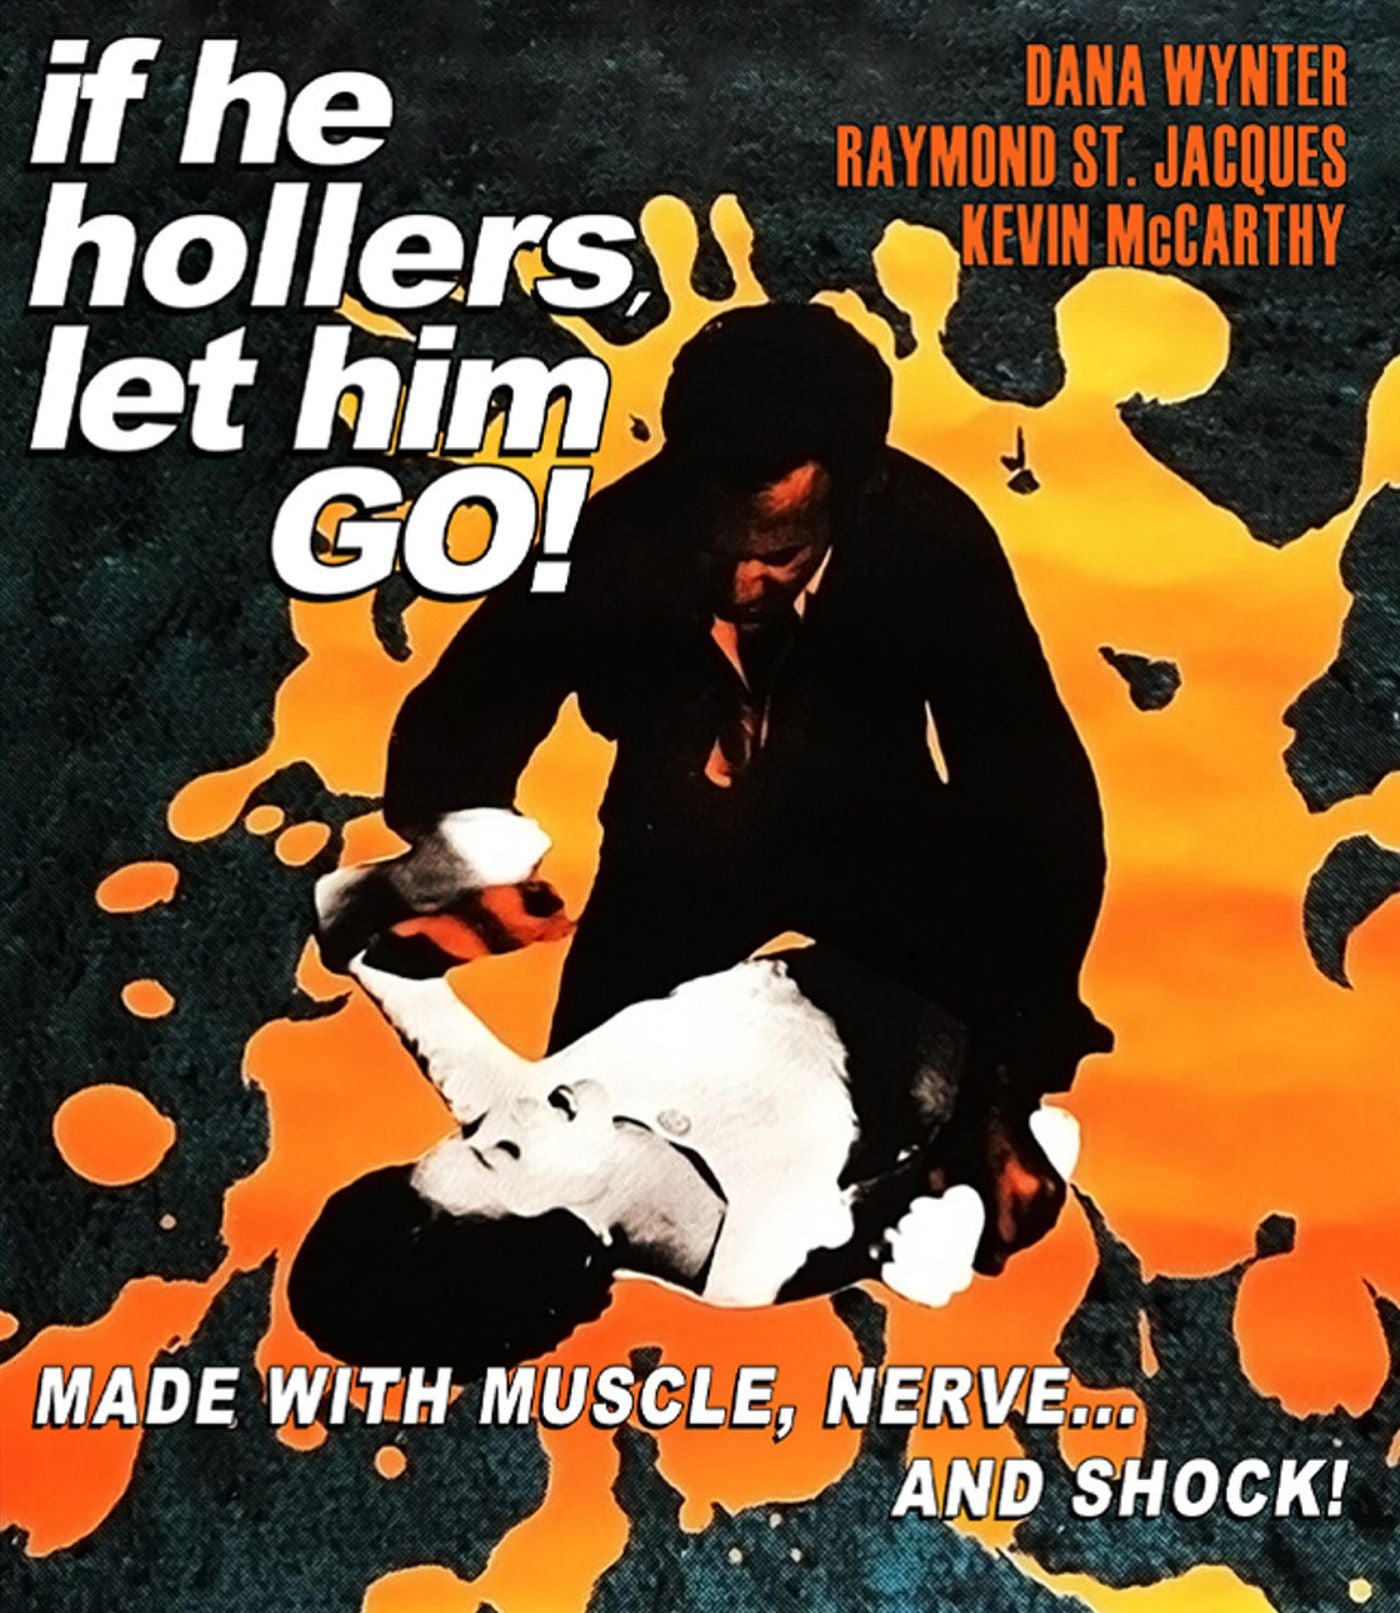 IF HE HOLLERS, LET HIM GO BLU-RAY